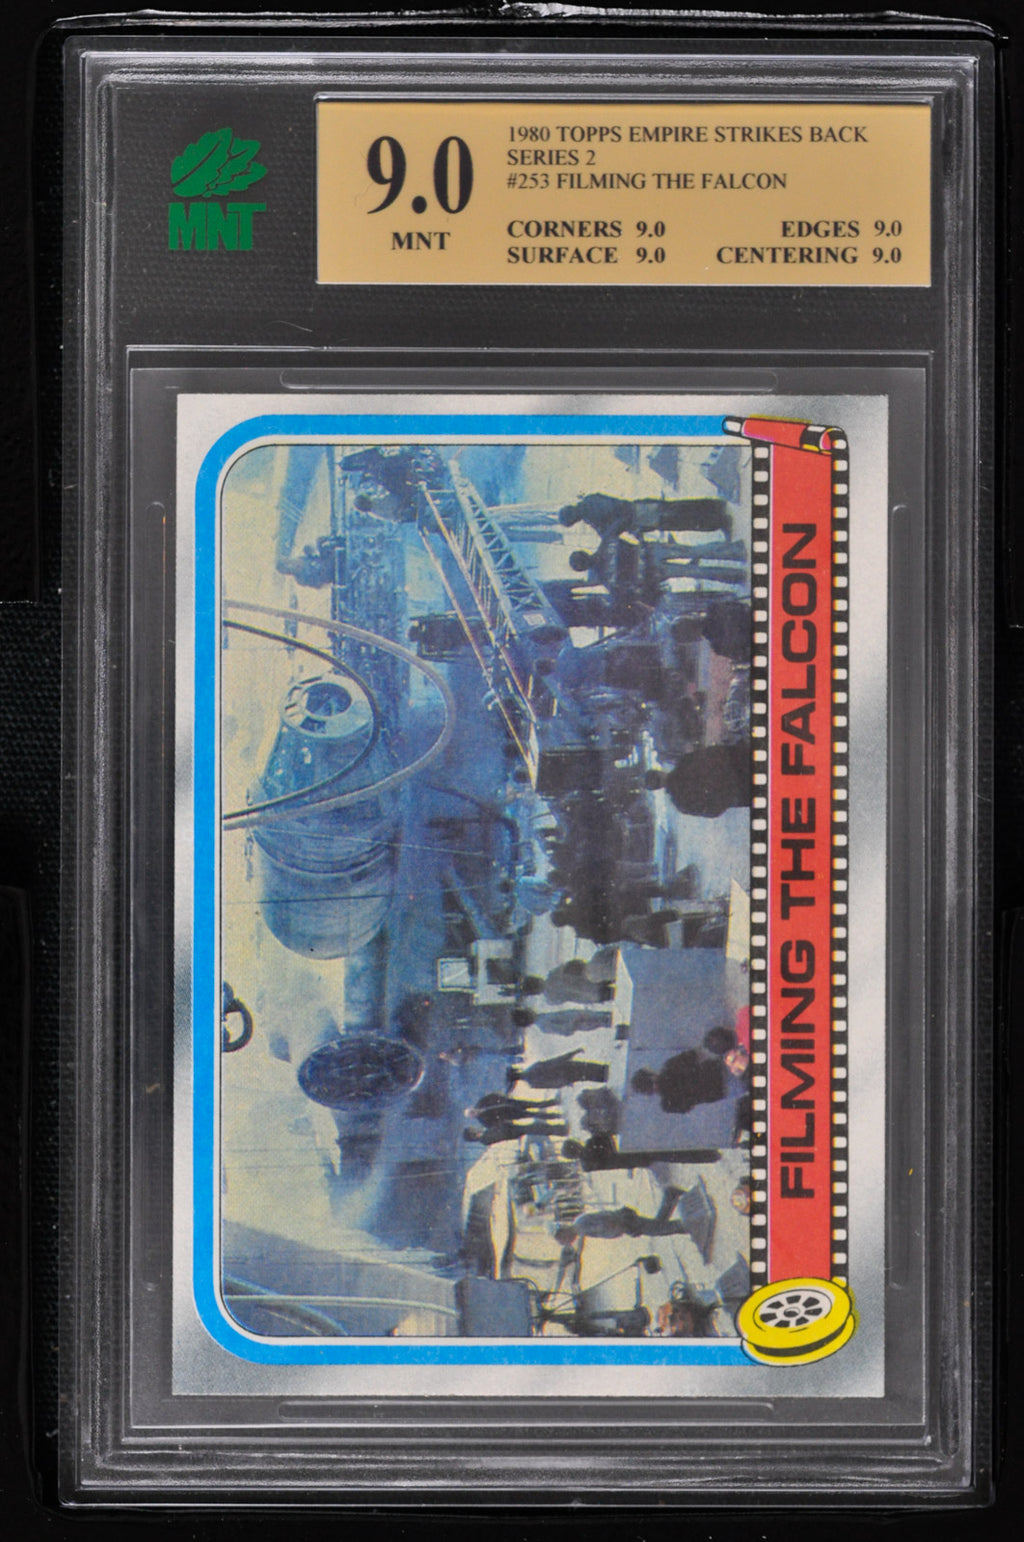 1980 Topps Star Wars ESB Series 2 - #253 Filming the Falcon - MNT 9